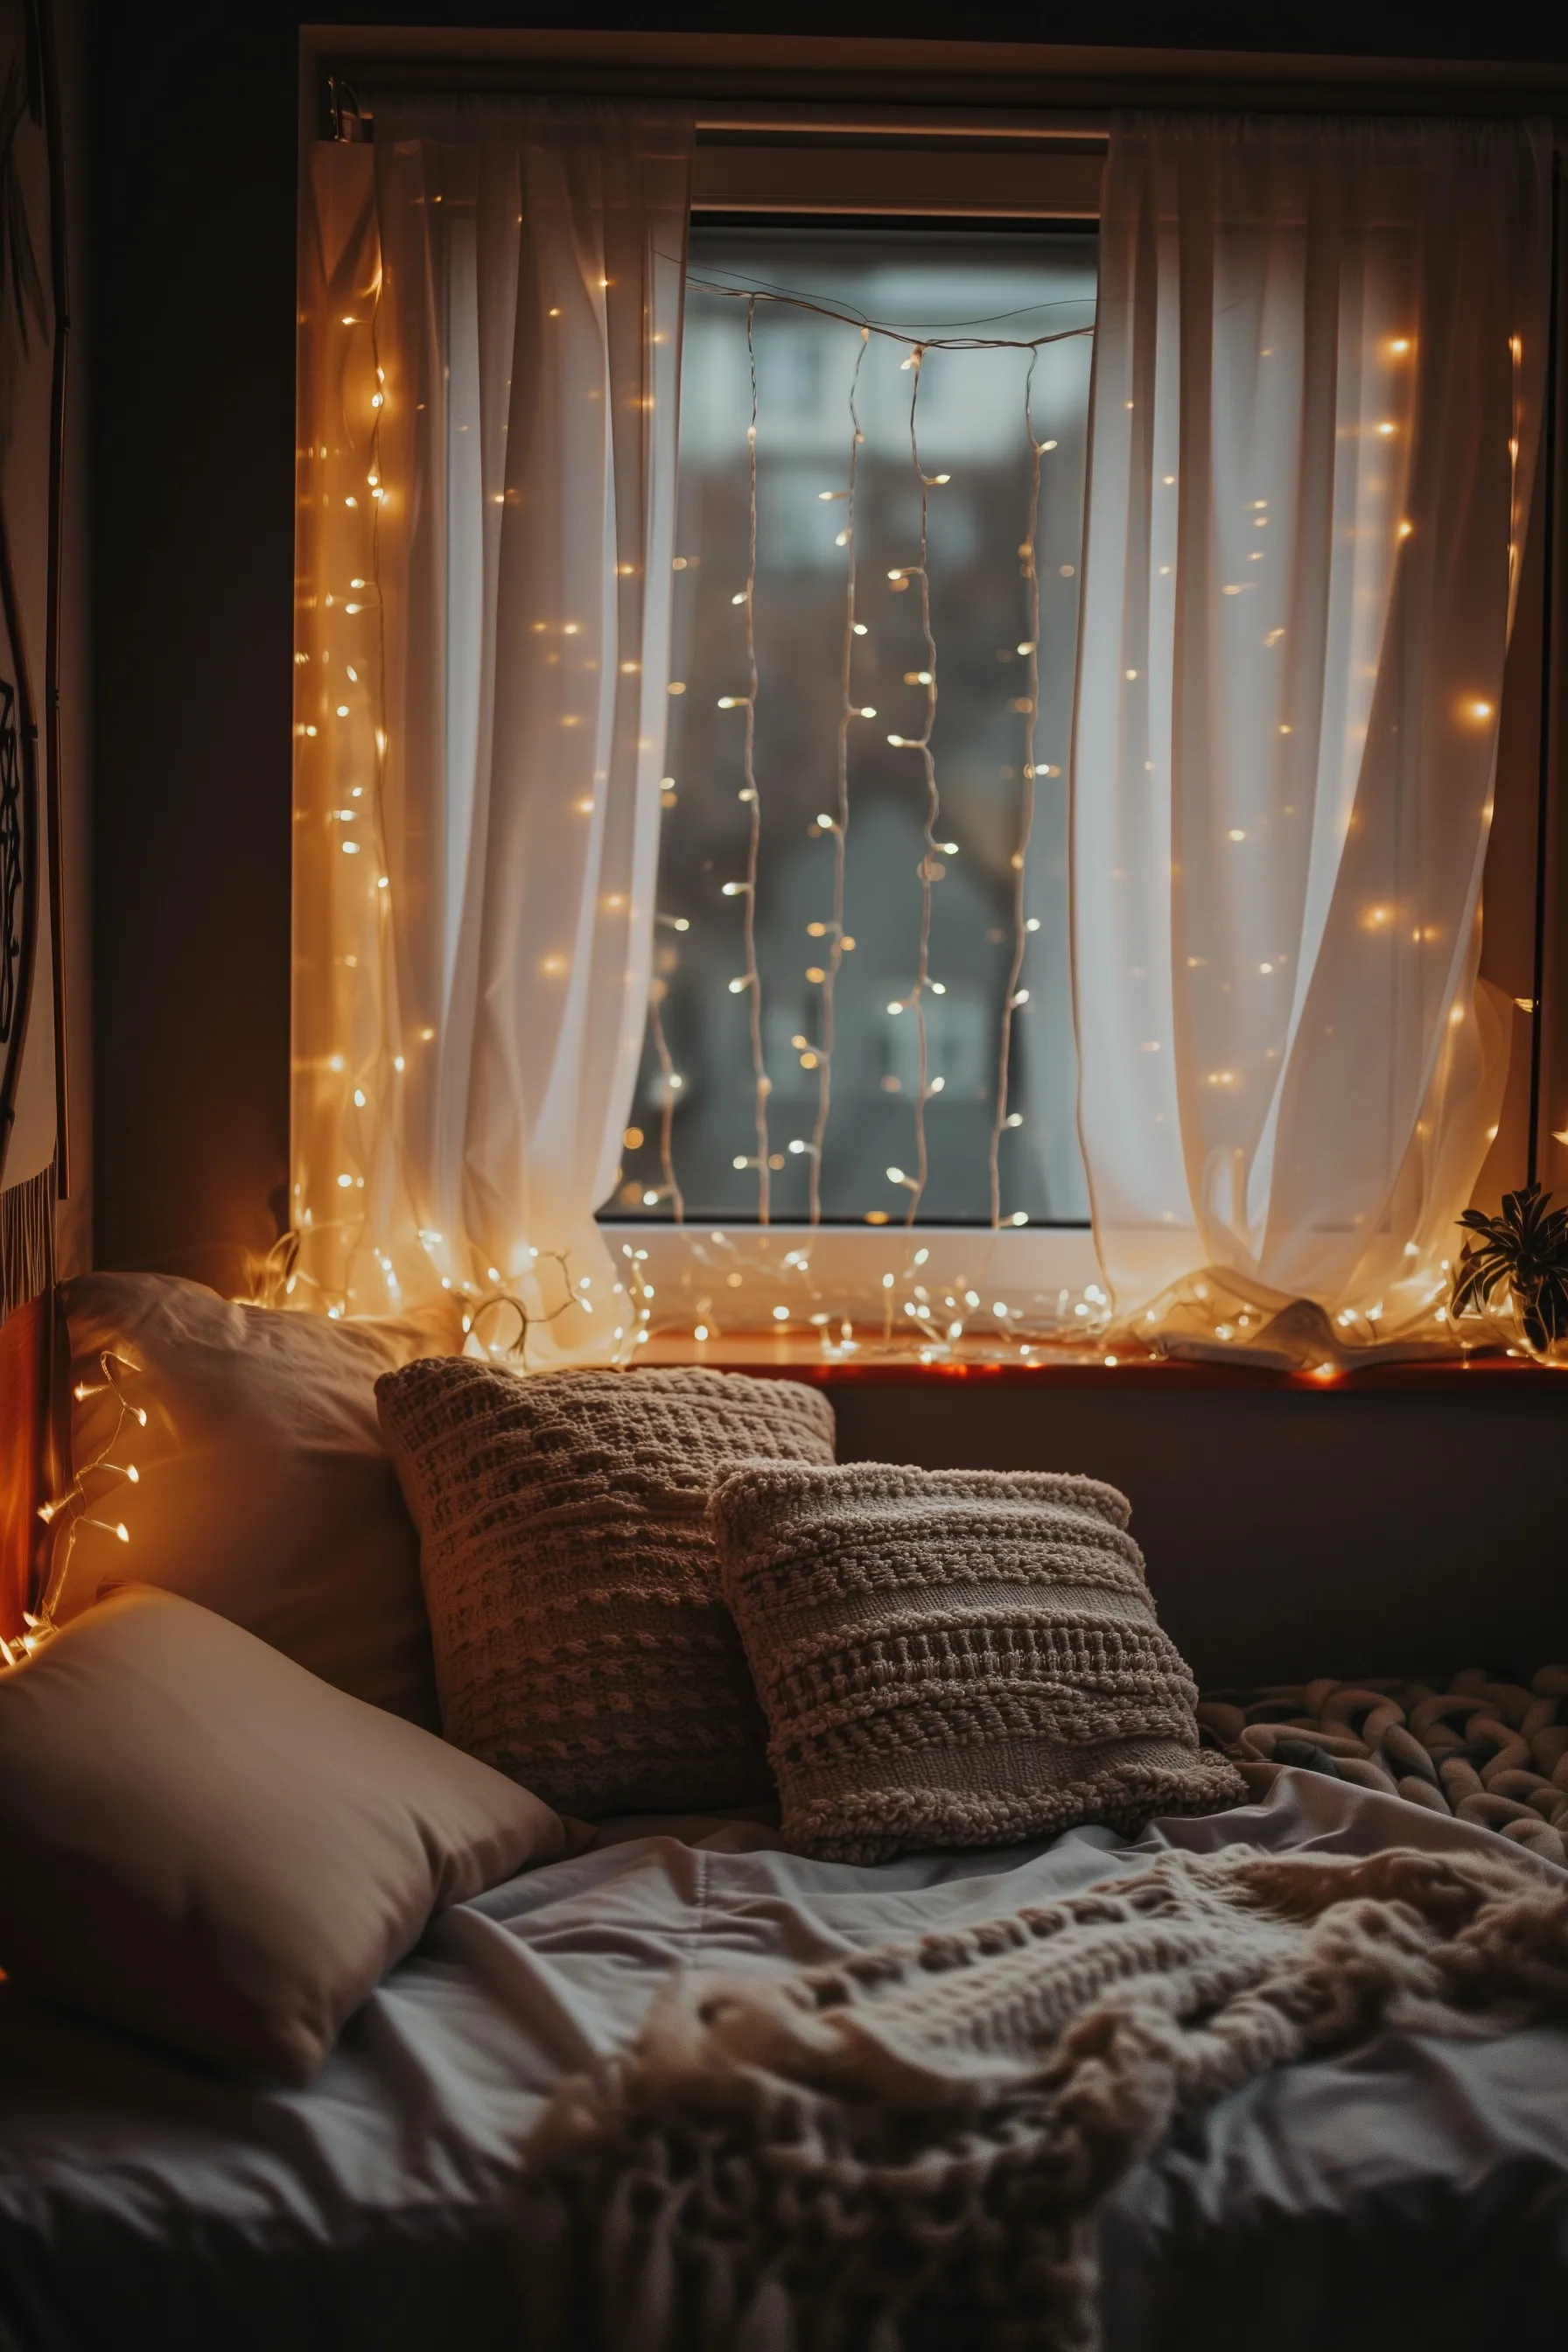 A dark bedroom with patterned throws and fairy lights